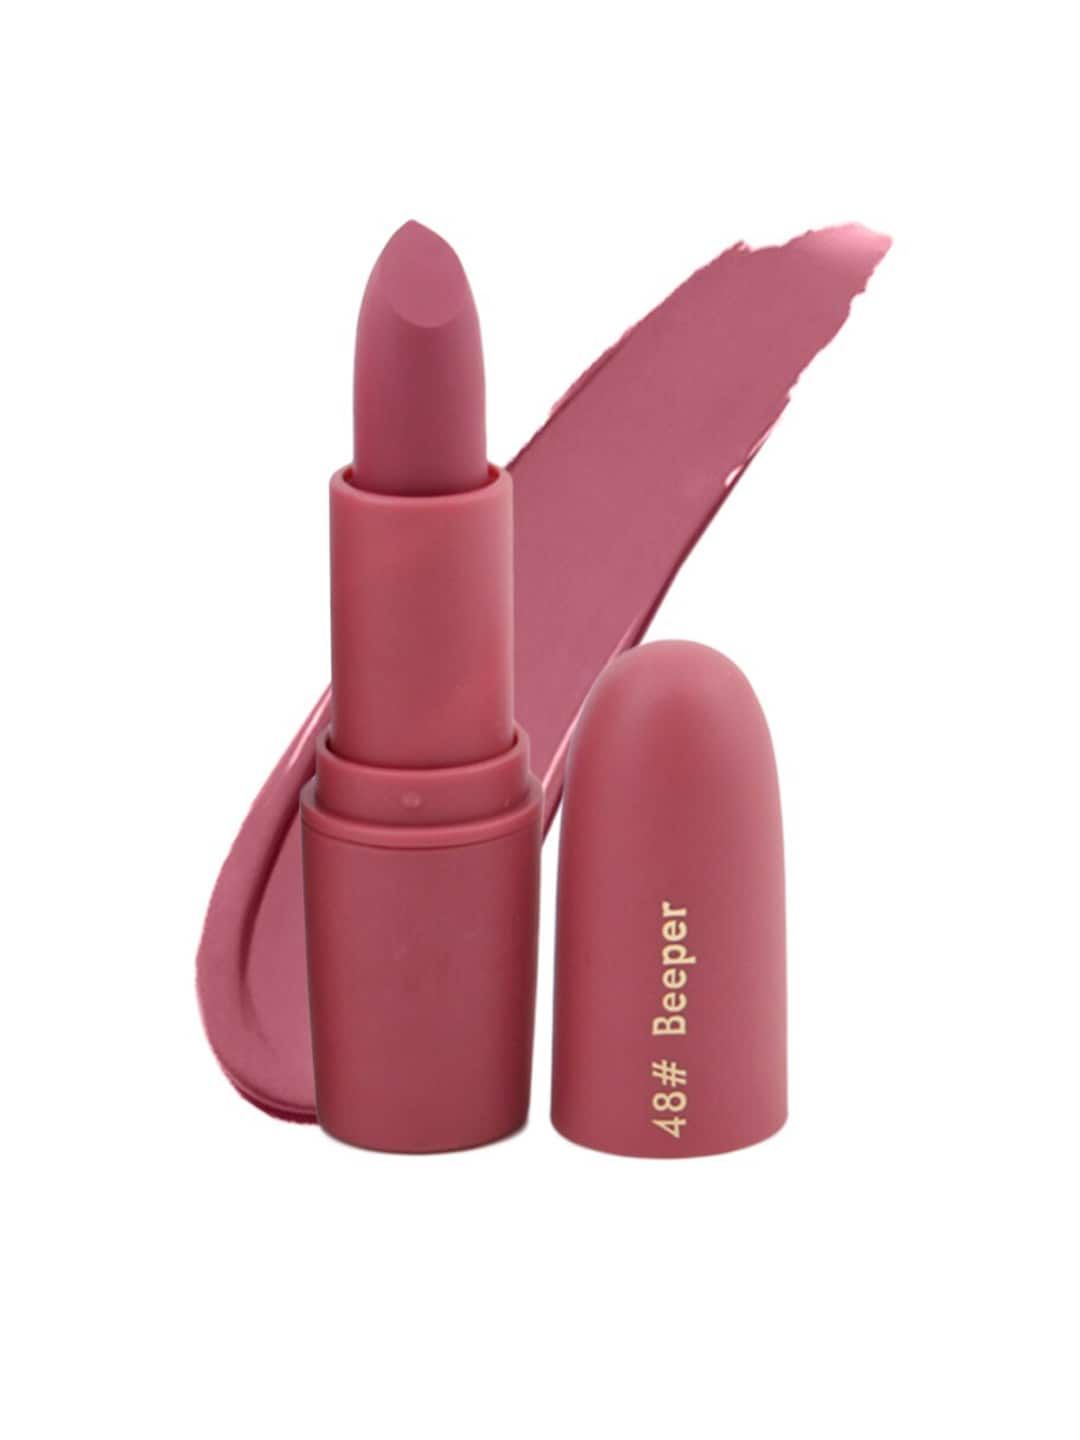 MISS ROSE Pink 48 Beeper Creamy Matte Bullet Lipstick 20g Price in India